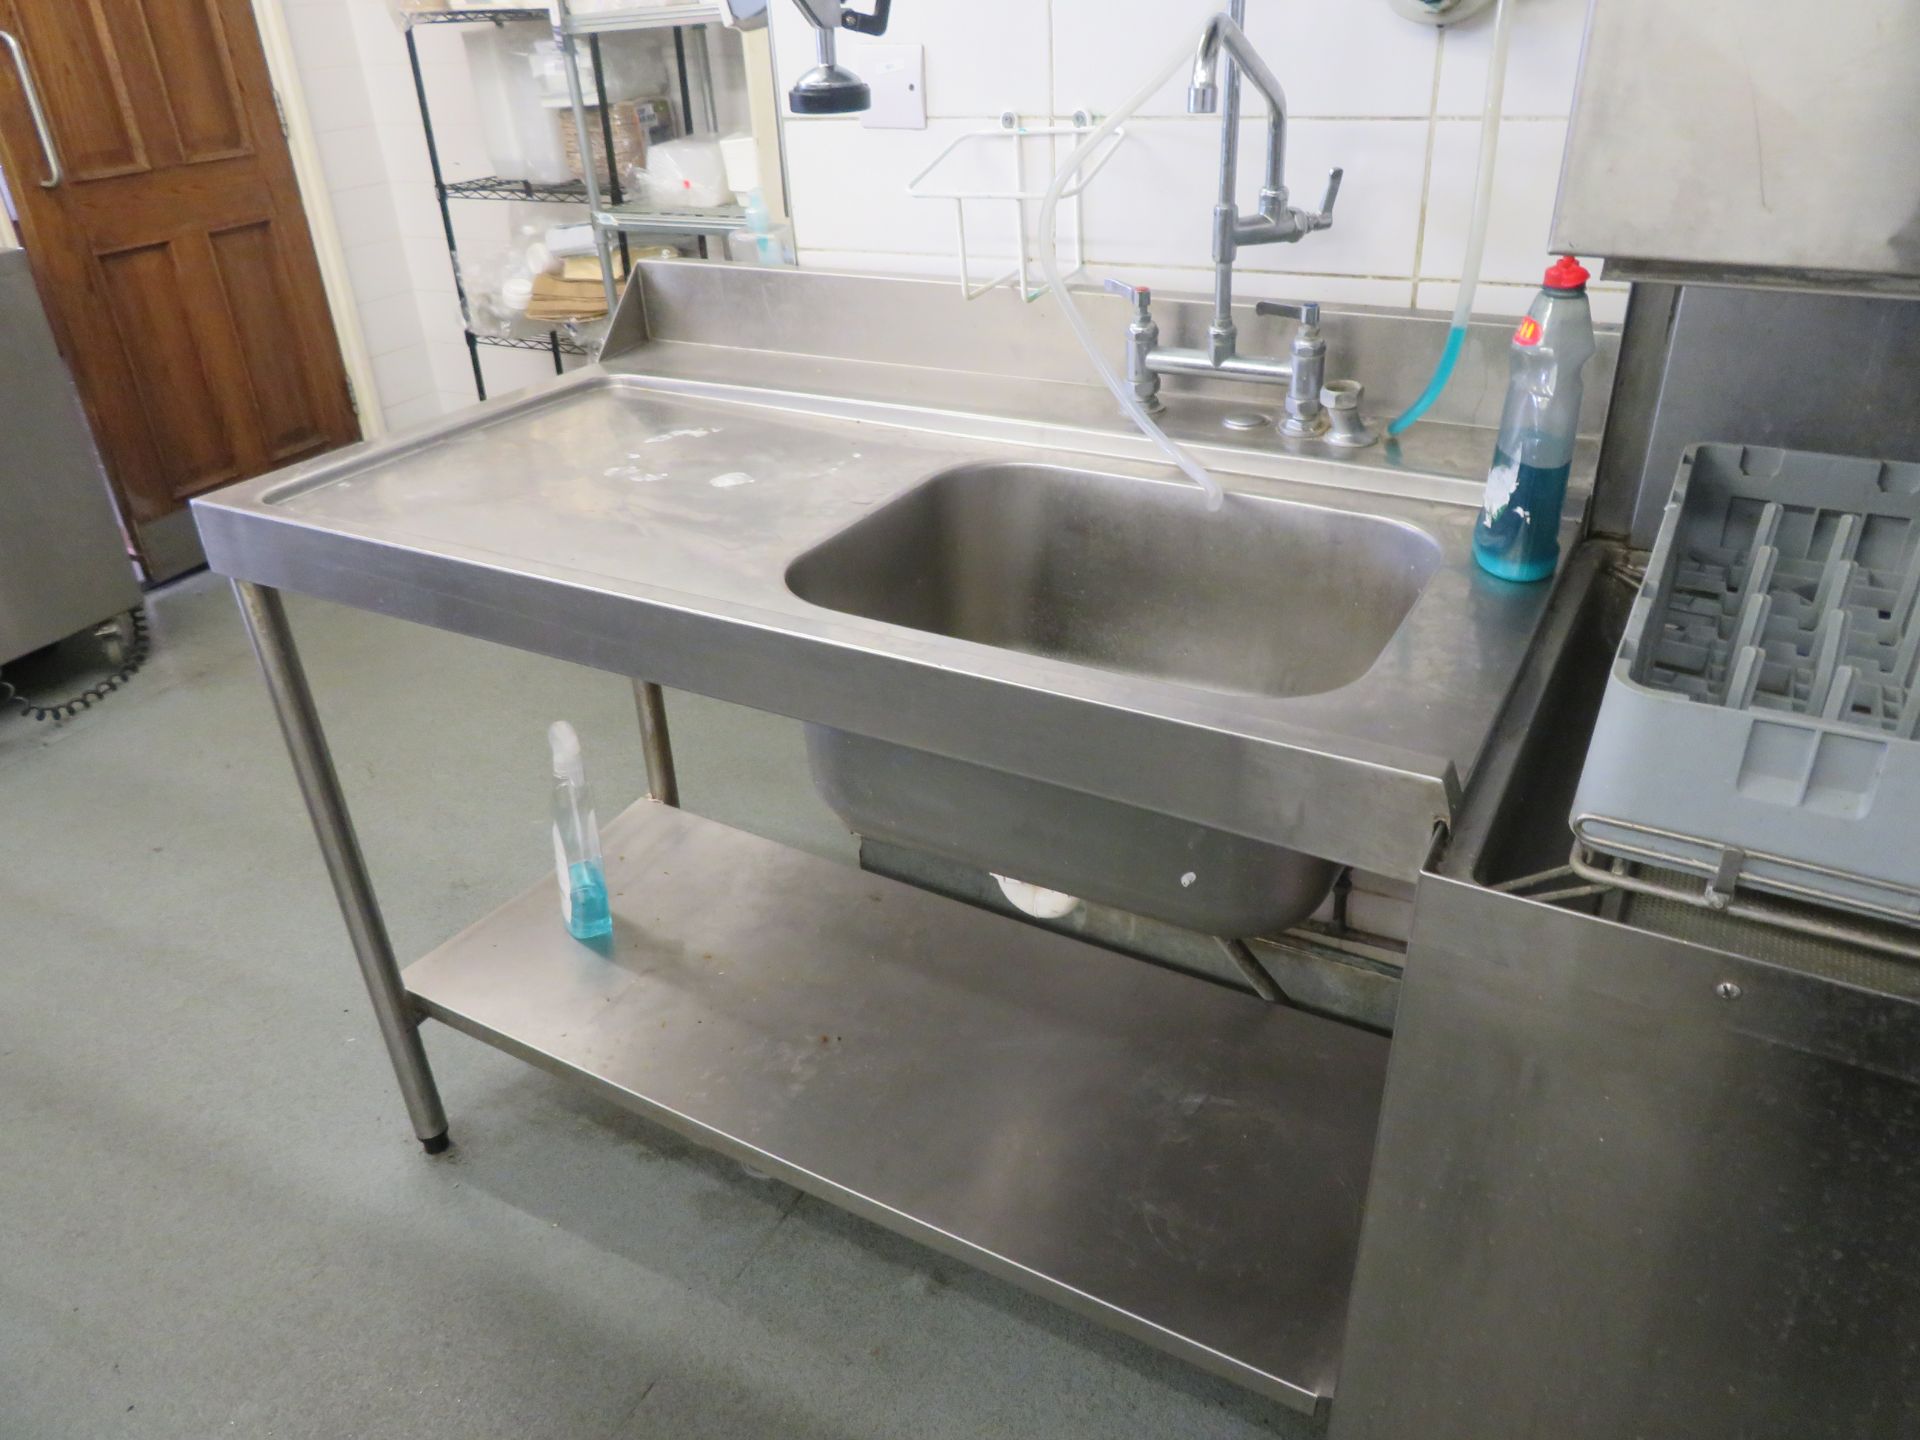 Maidaid C1035WS Dishwasher with Washdown Sink and Takeaway Table - Image 6 of 8